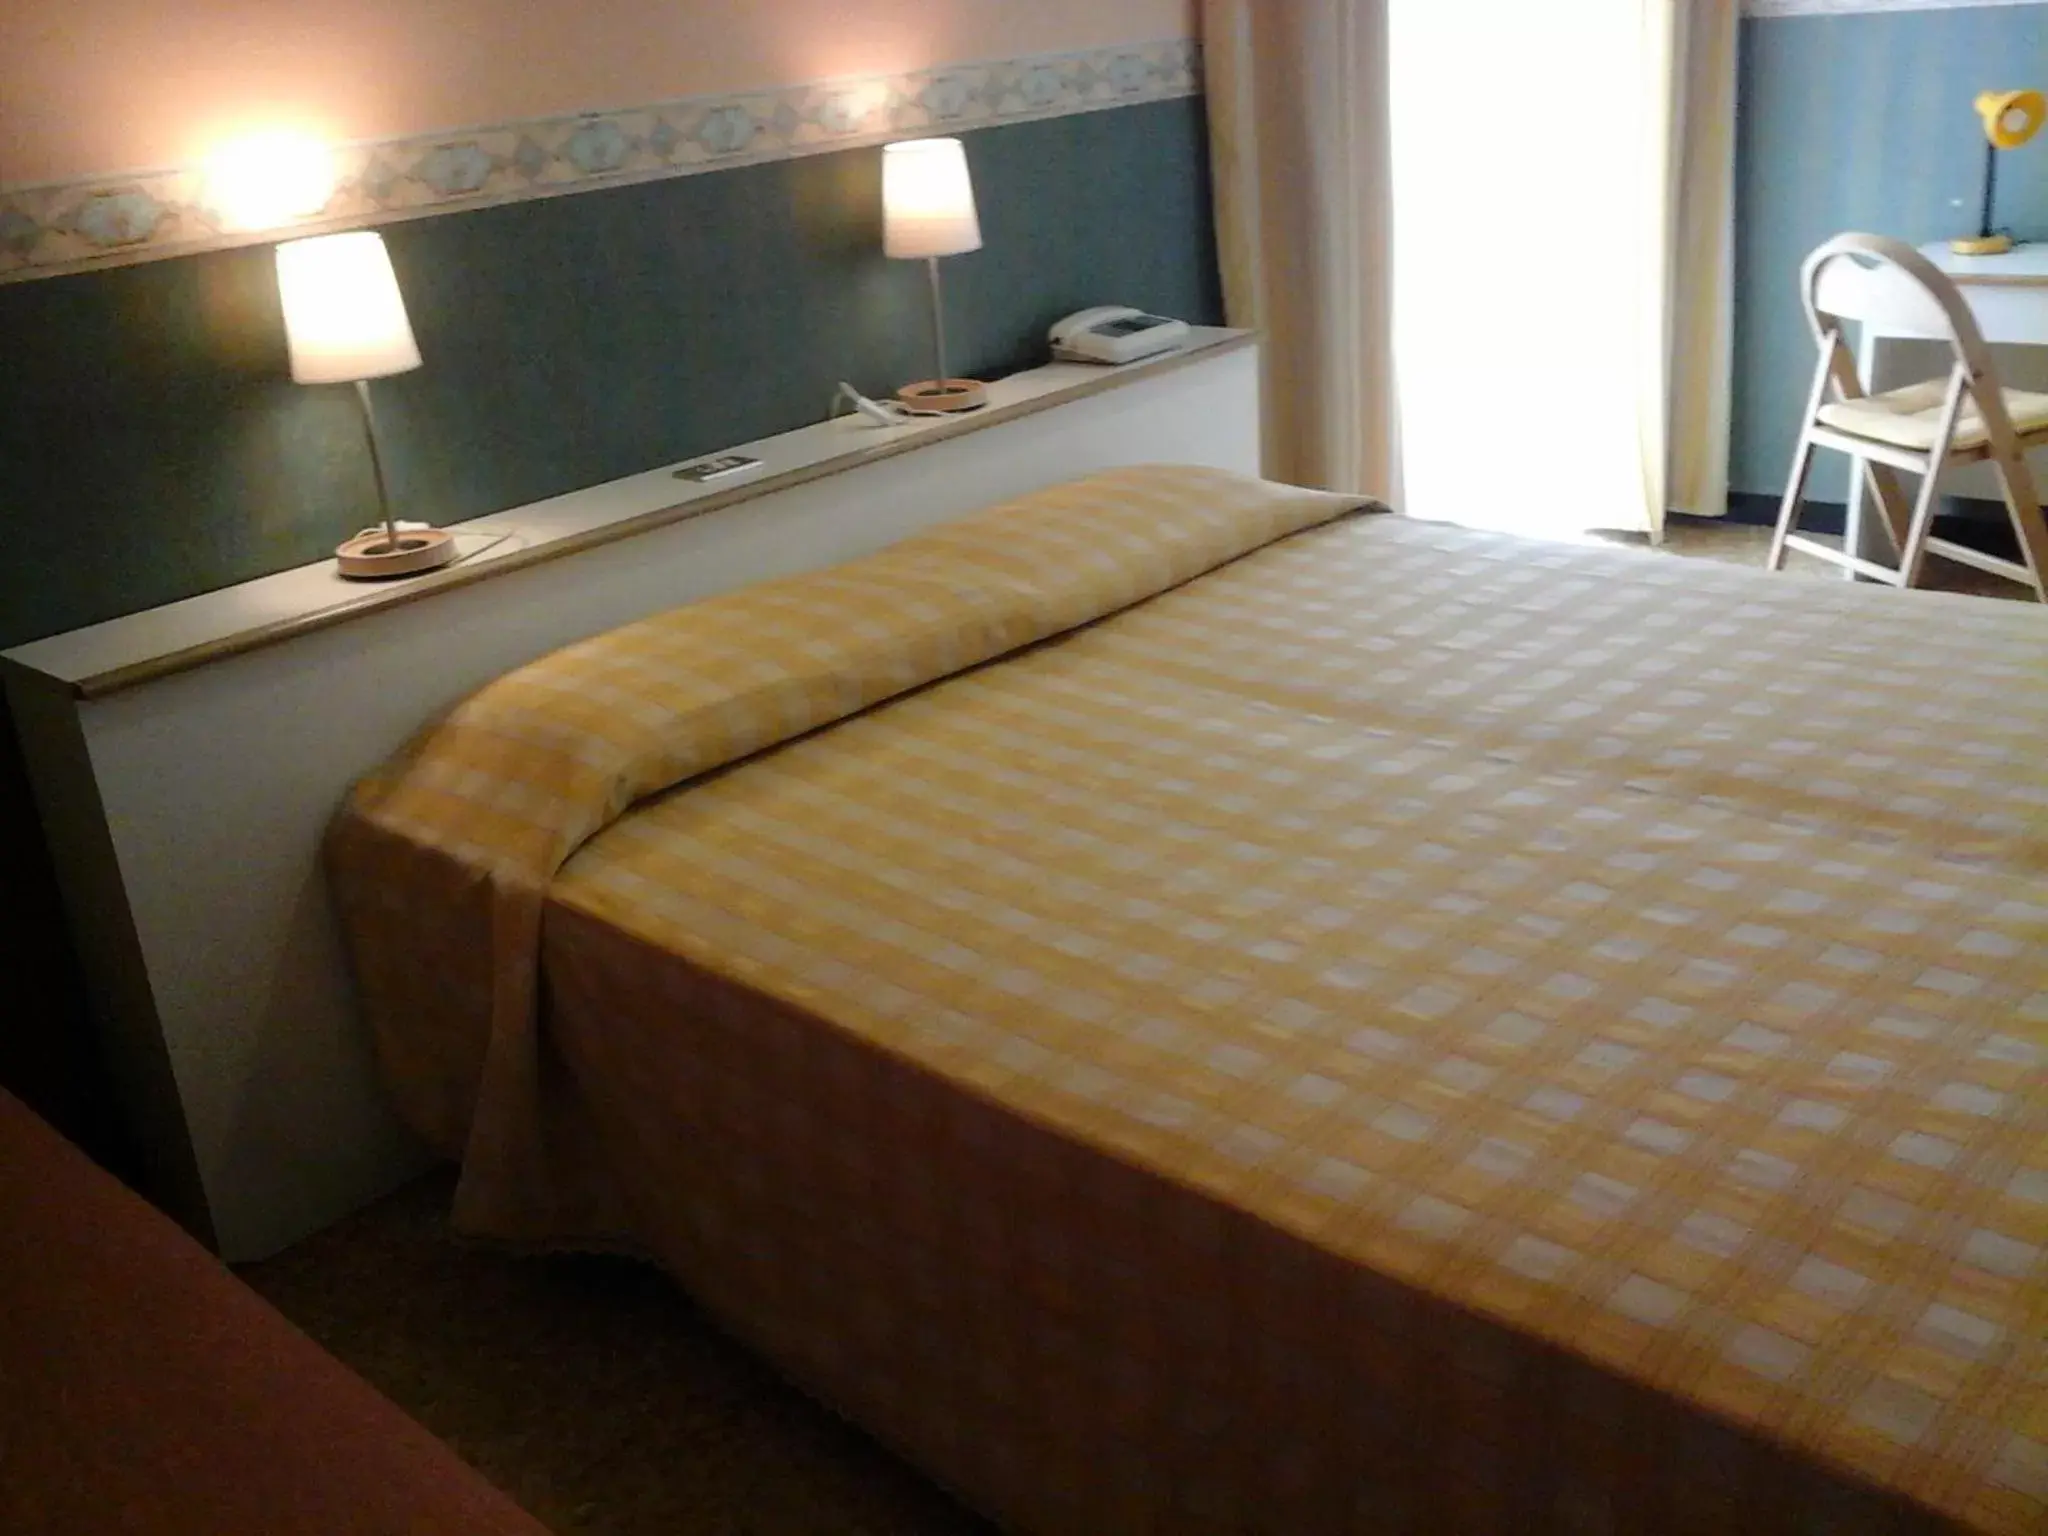 Bed in Hotel Morchio Mhotelsgroup